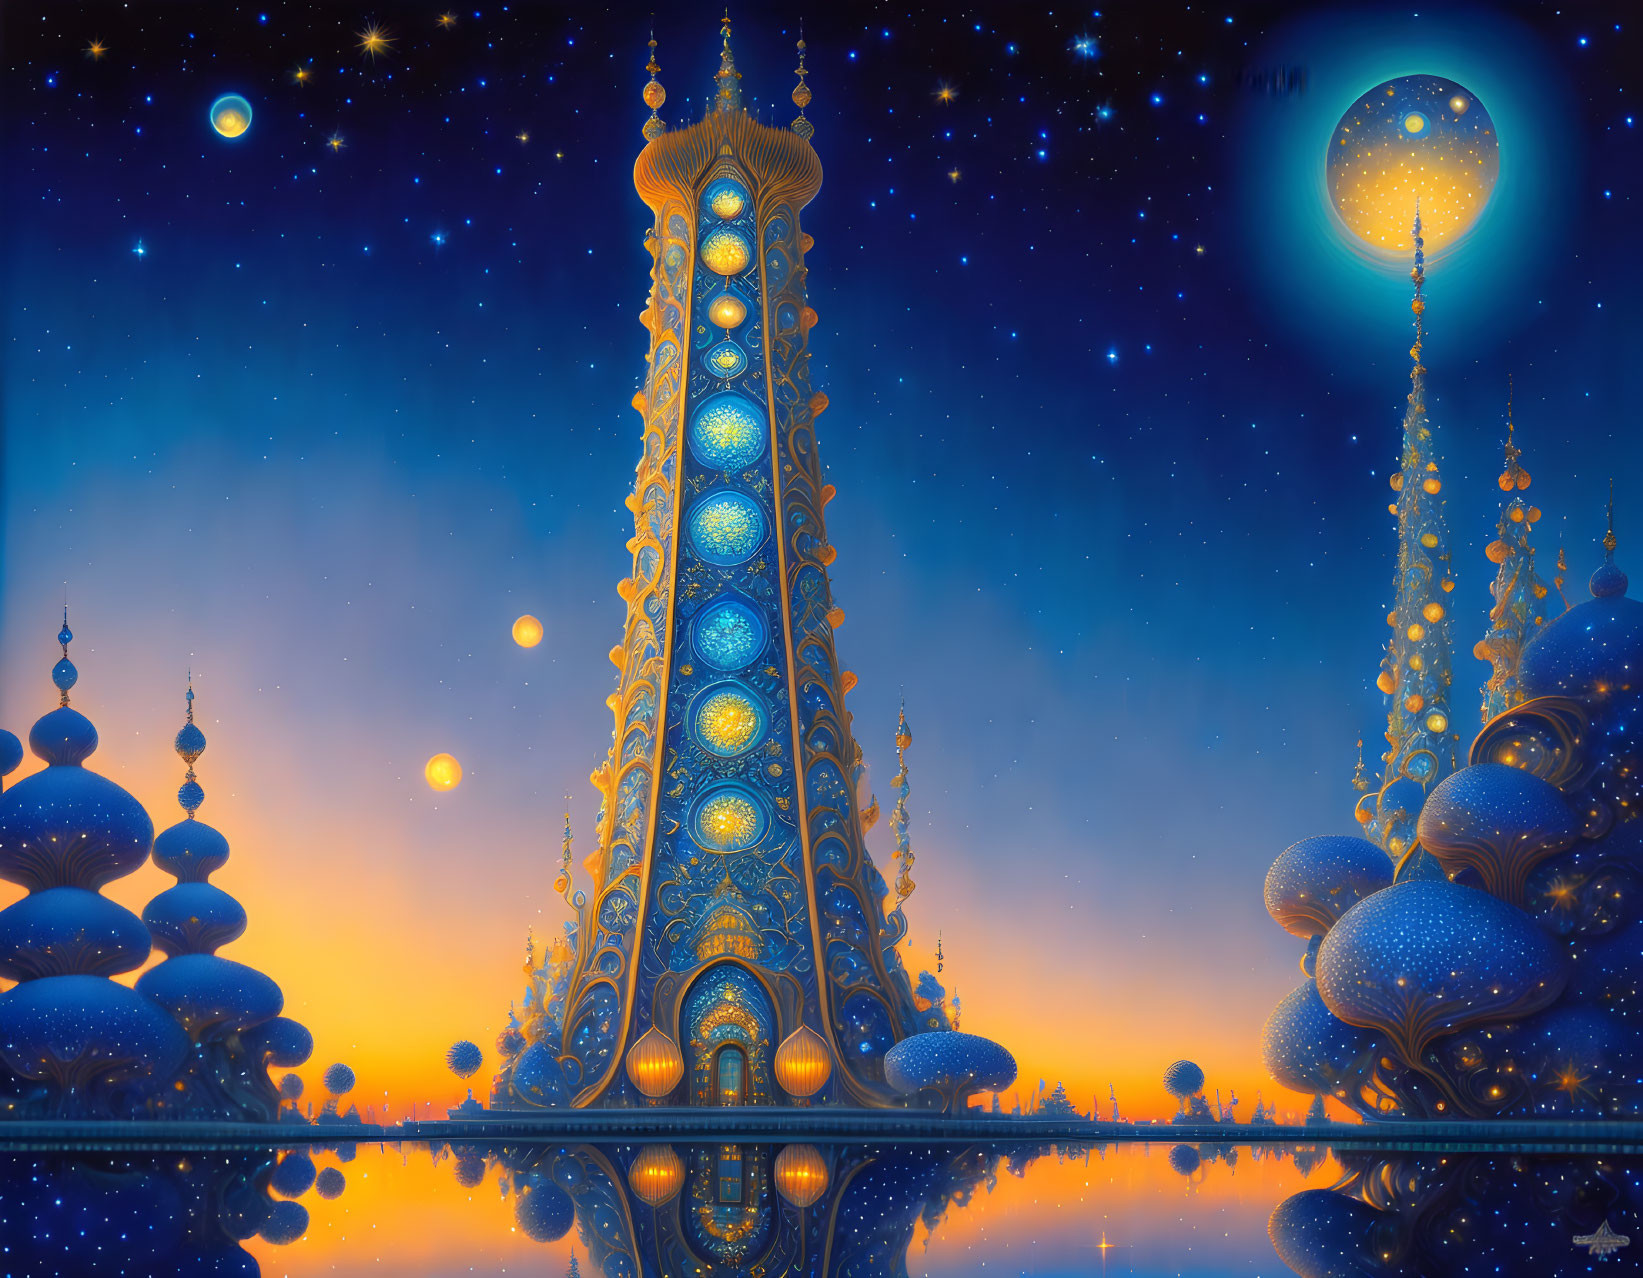 Ethereal starlit scene with glowing towers and crescent moon